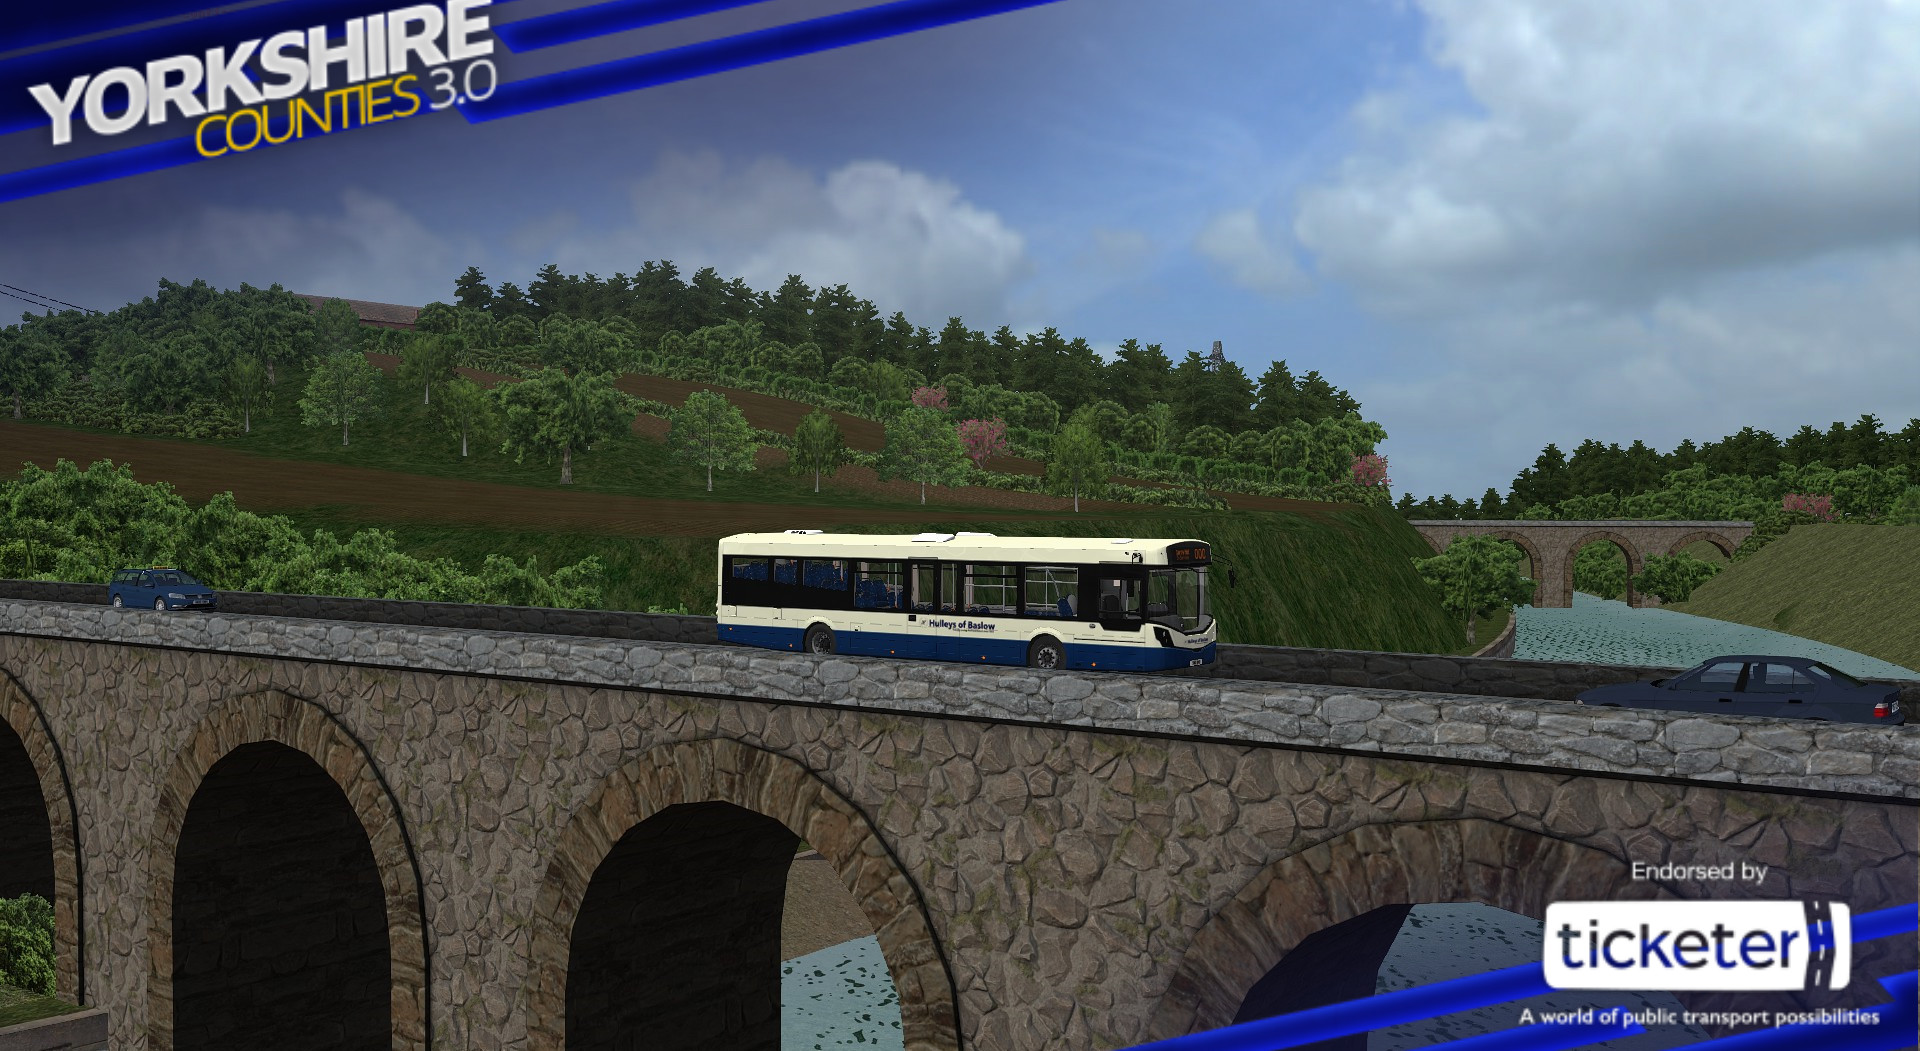 OMSI 2 Add-on Yorkshire Counties screenshot